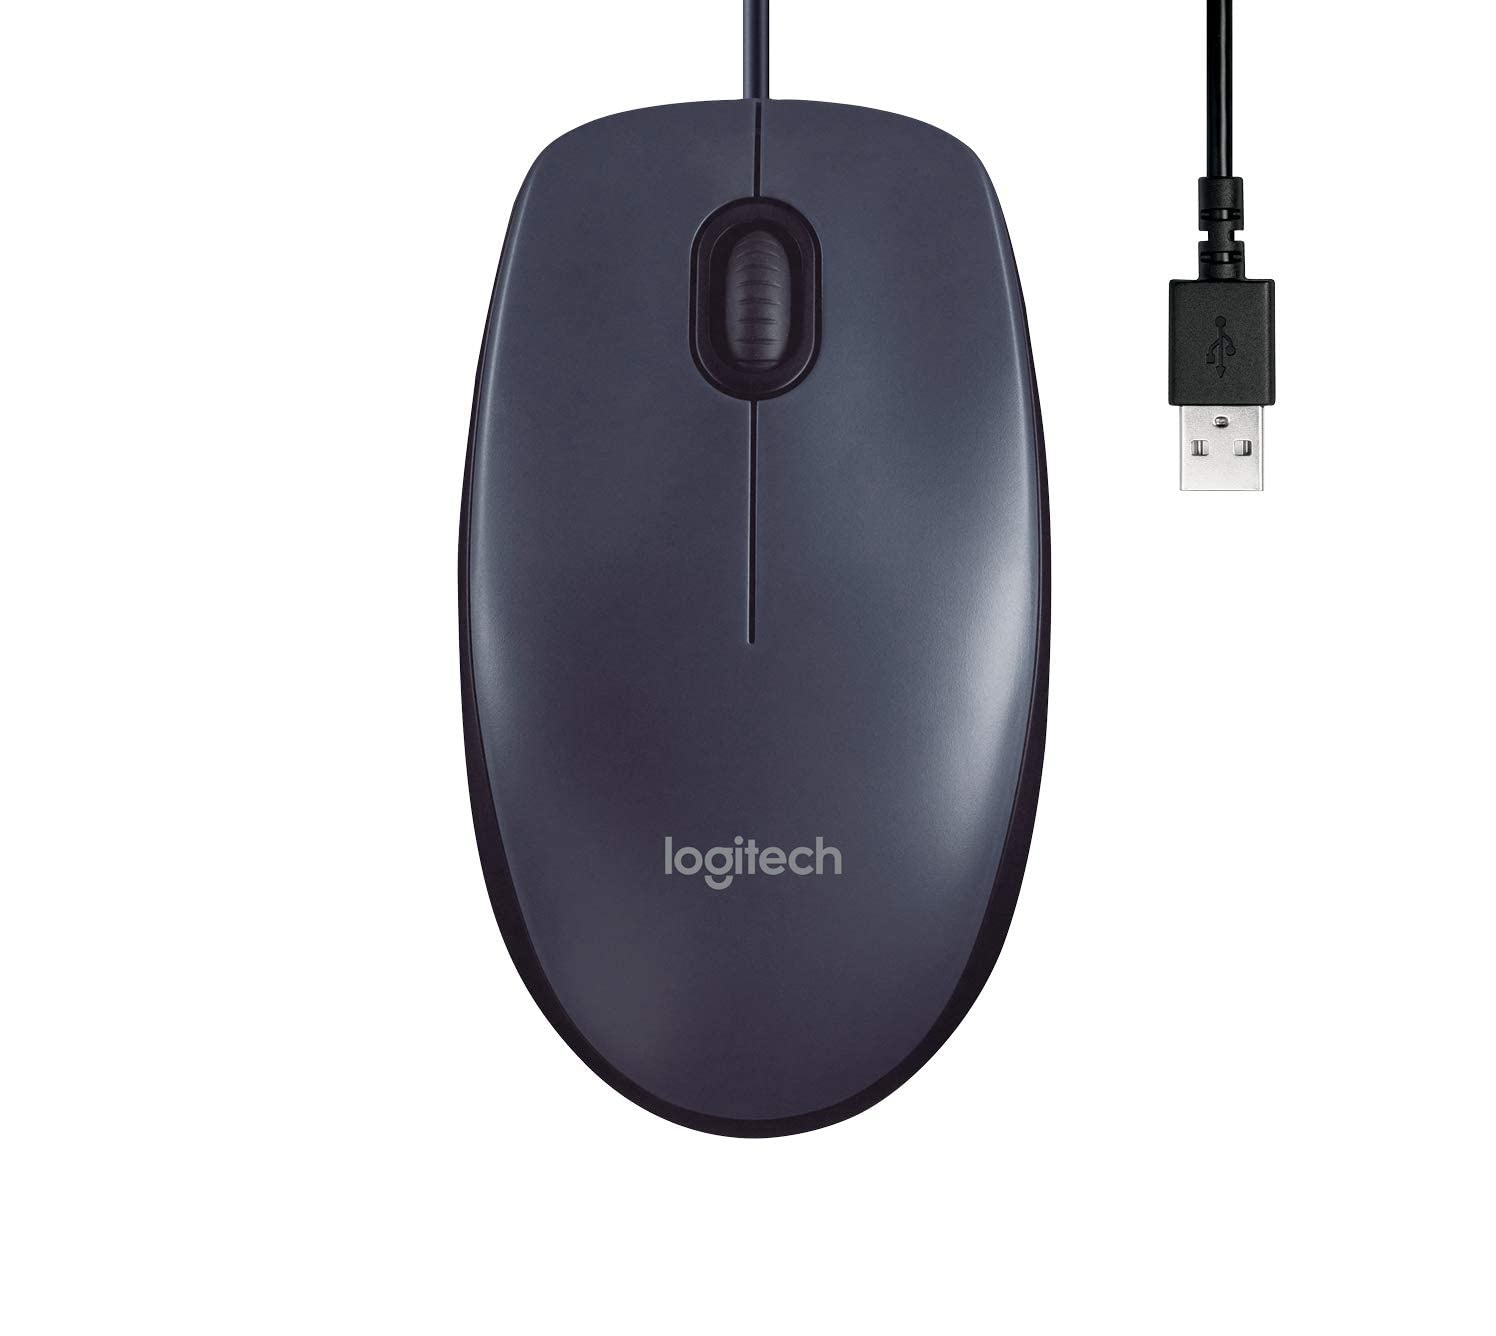 Logitech M100r Black Wired USB SIMPLE TO AND USE. HIGH-DEFINITION OPTICAL TRACKING. Wired Interface: USB 2.0 Optical Mouse